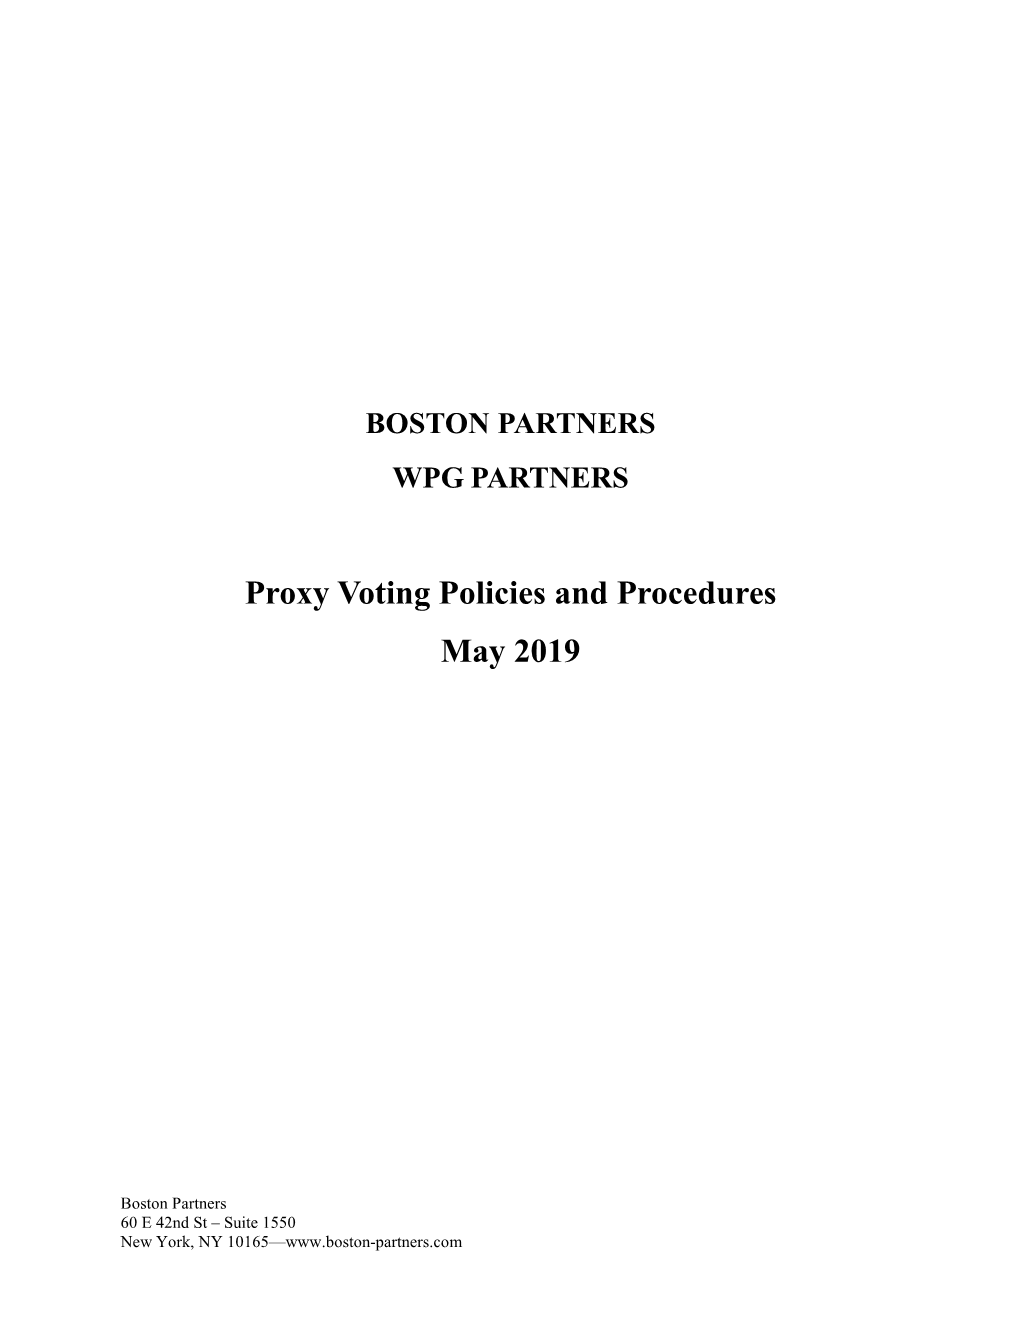 Proxy Voting Policies and Procedures May 2019